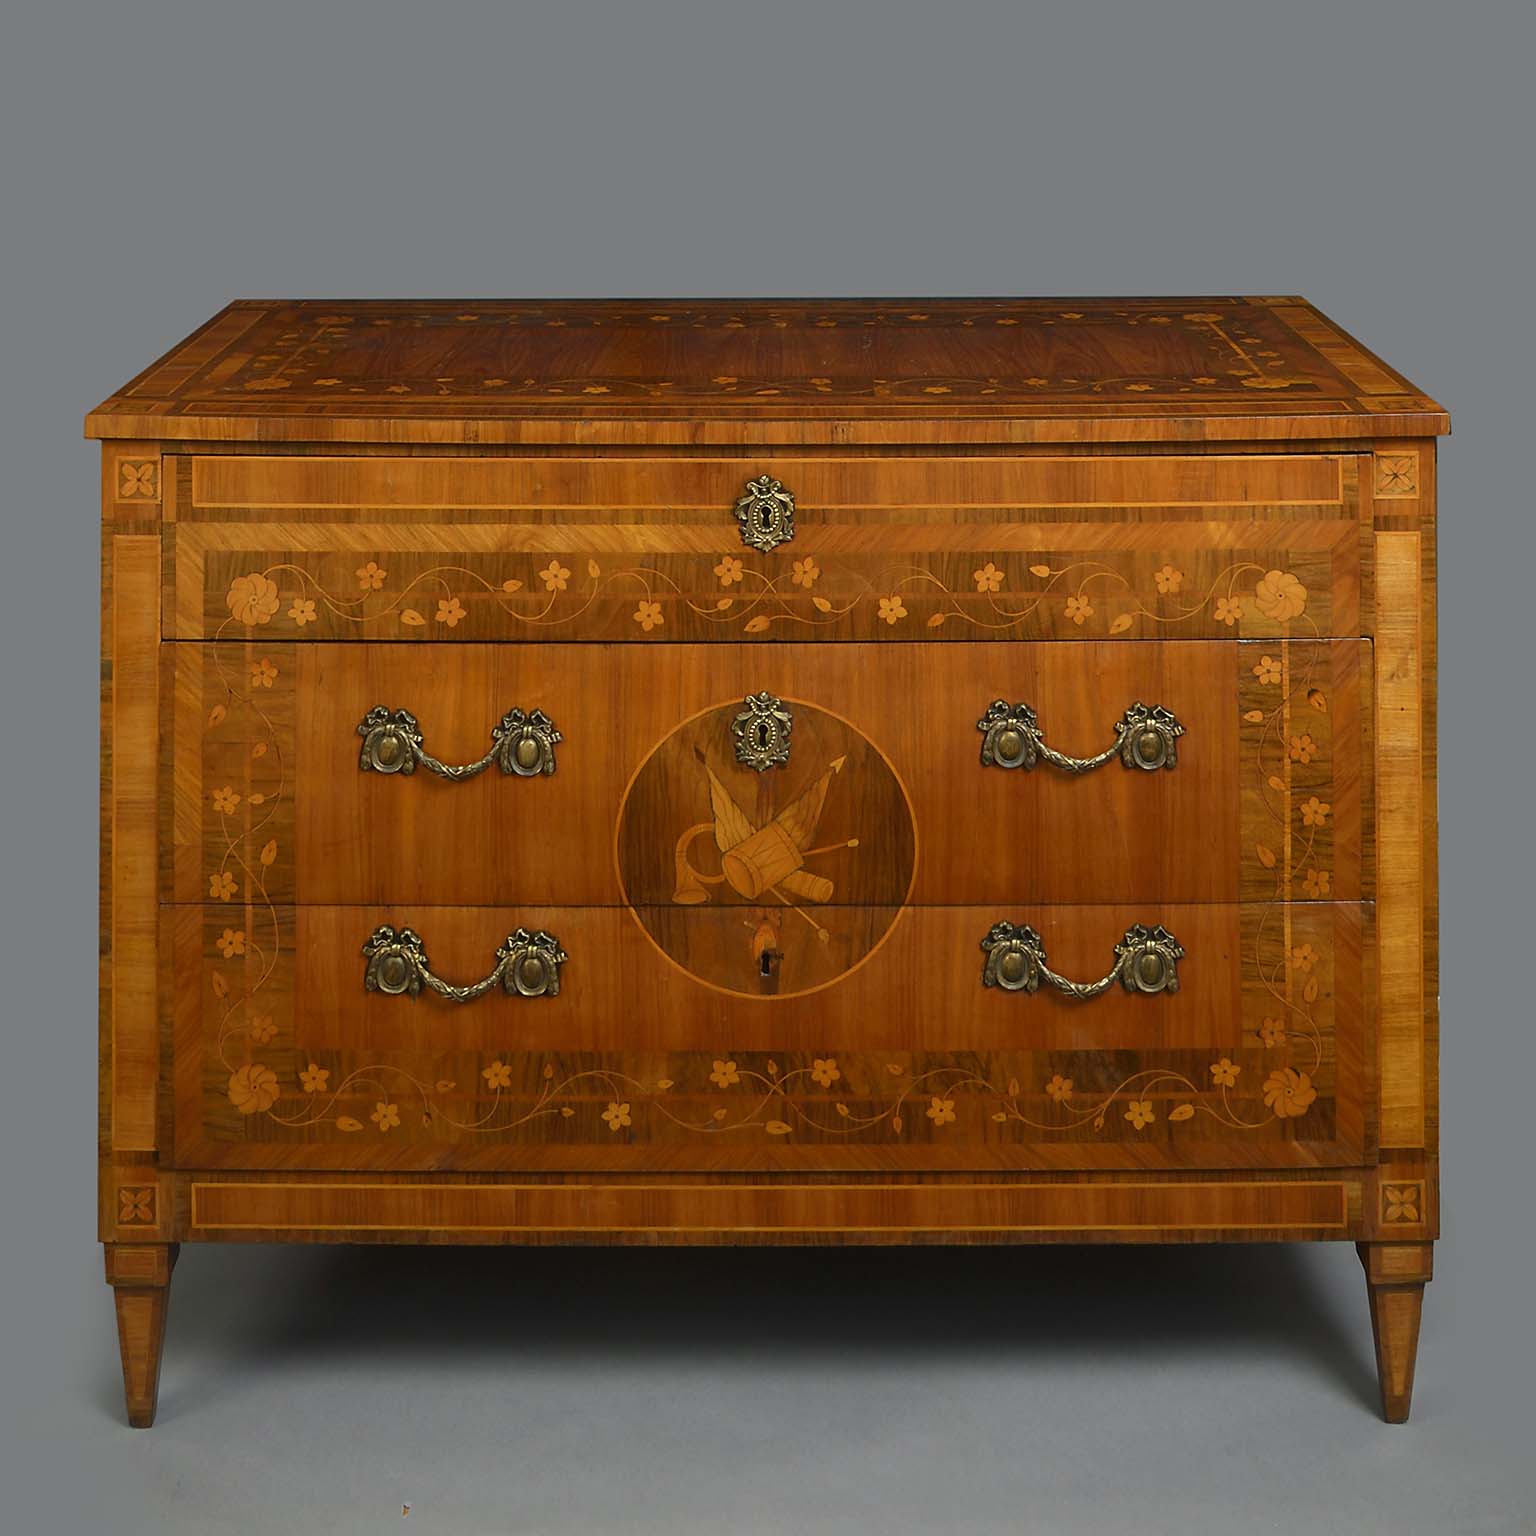 Walnut, Sycamore and Holly Inlaid Commode